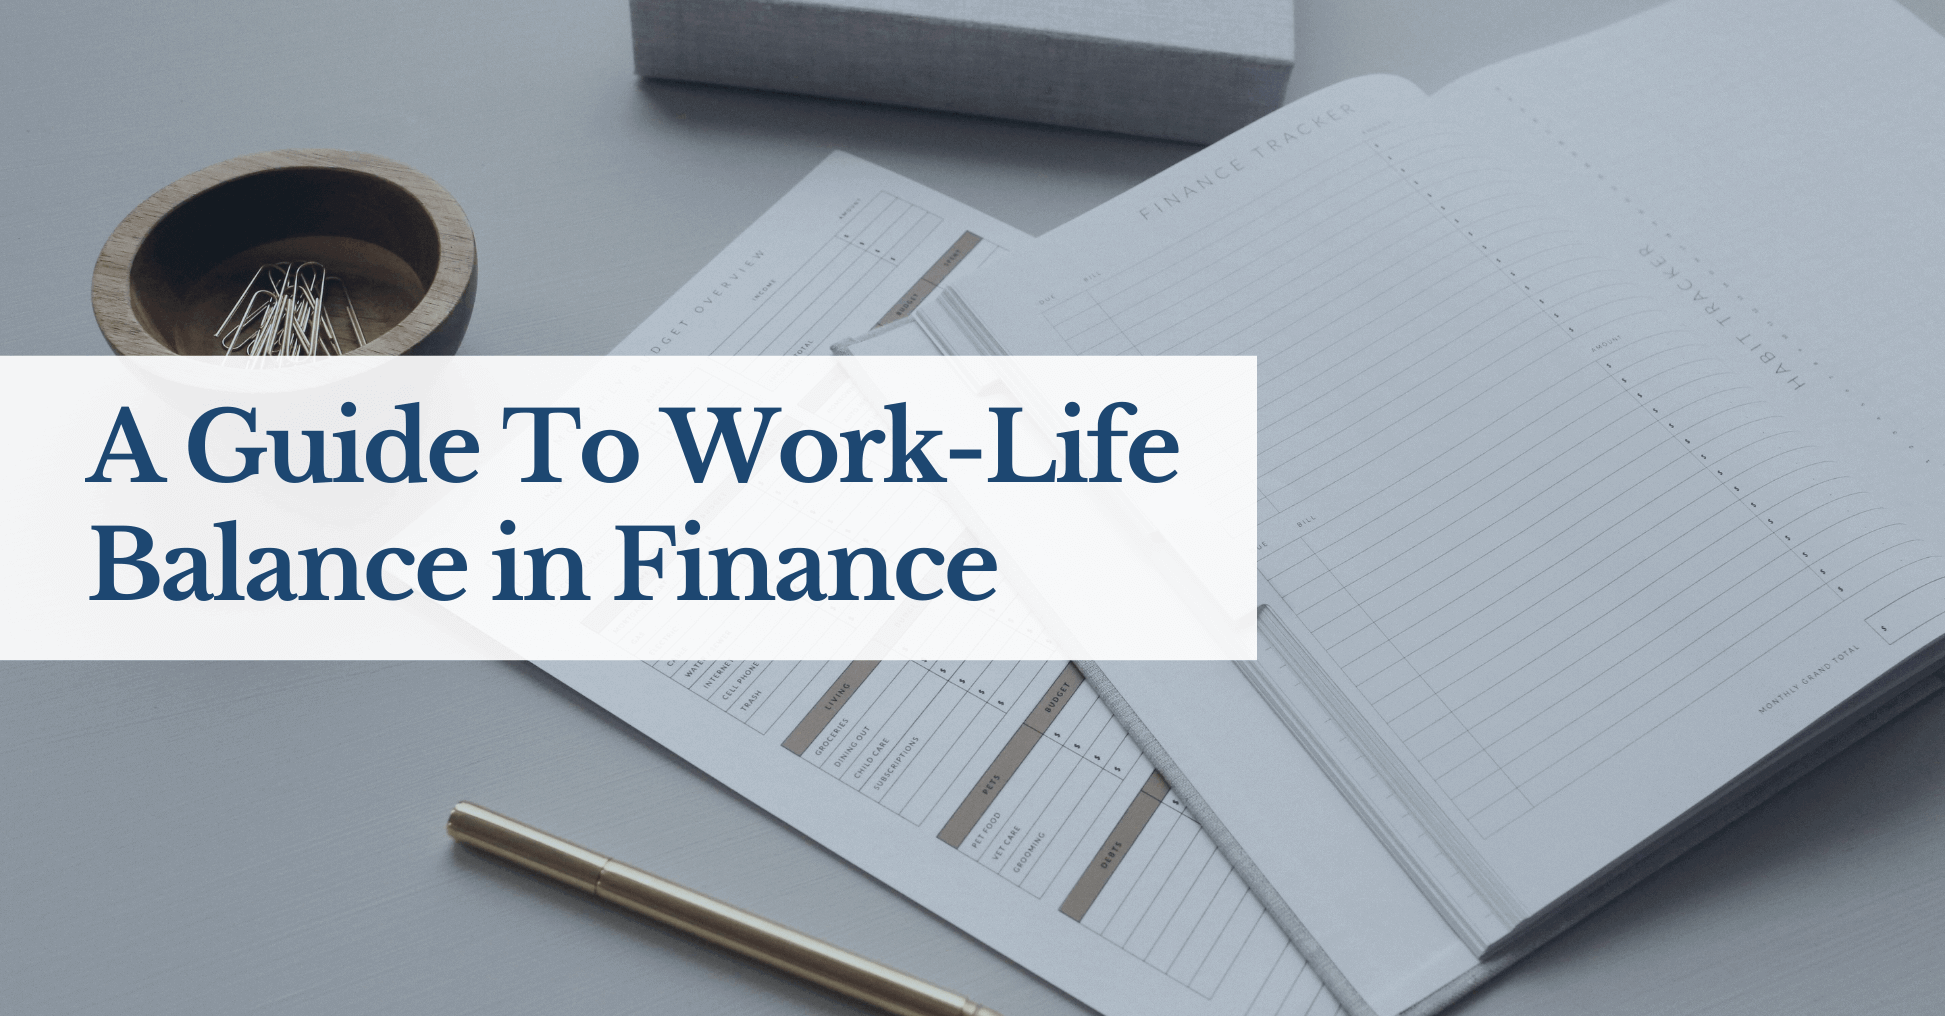 A Guide To Work-Life Balance in Finance